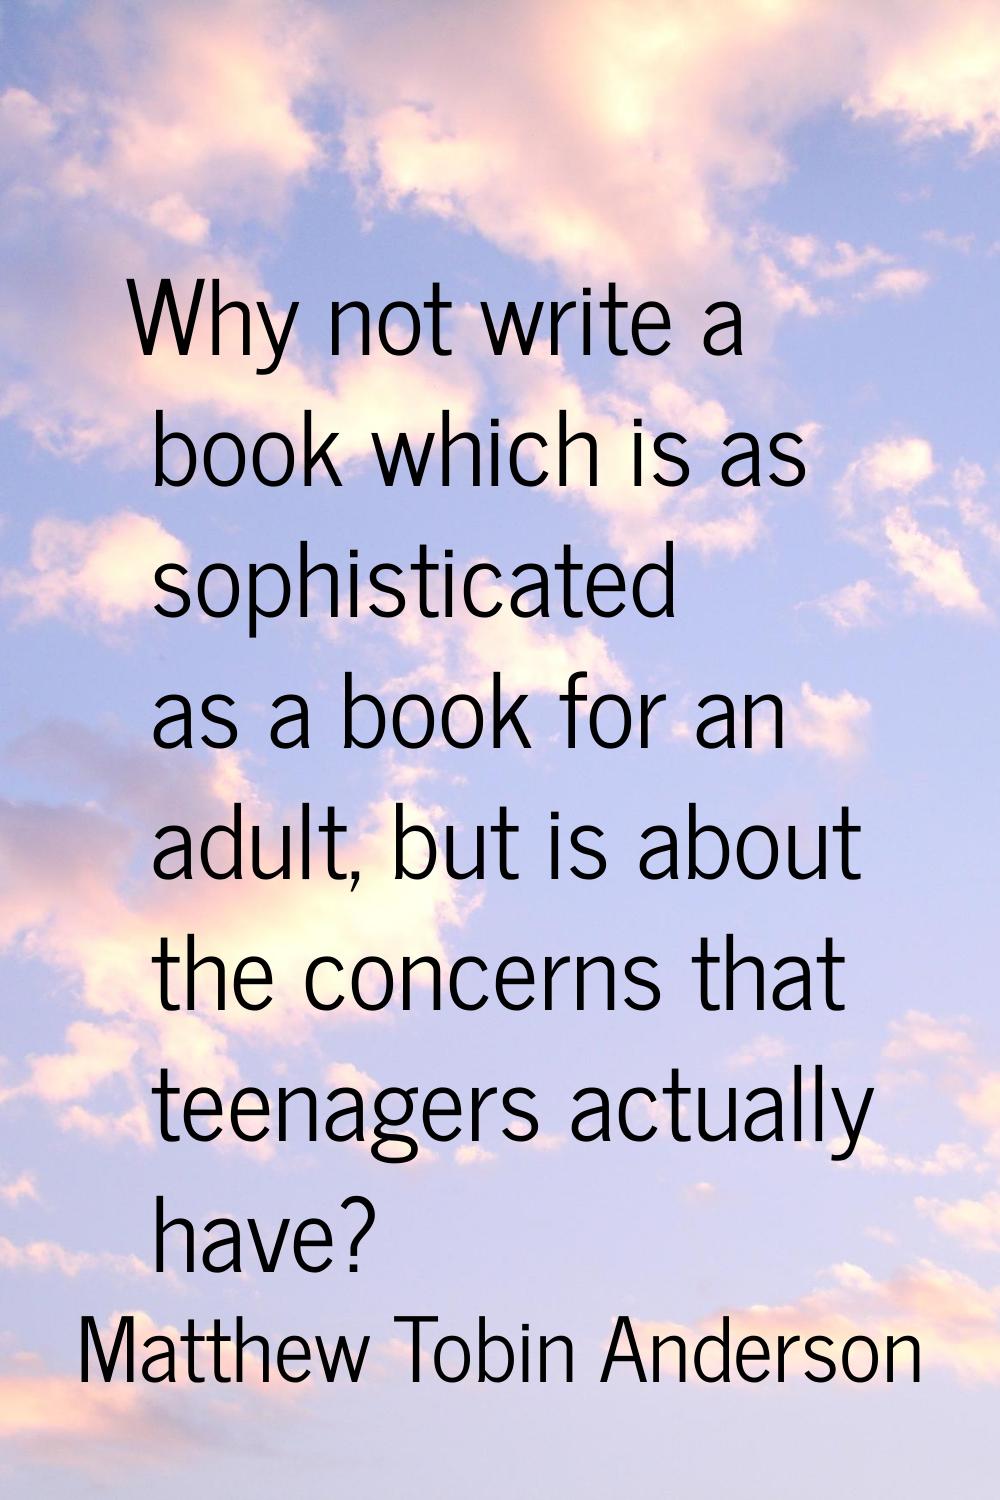 Why not write a book which is as sophisticated as a book for an adult, but is about the concerns th